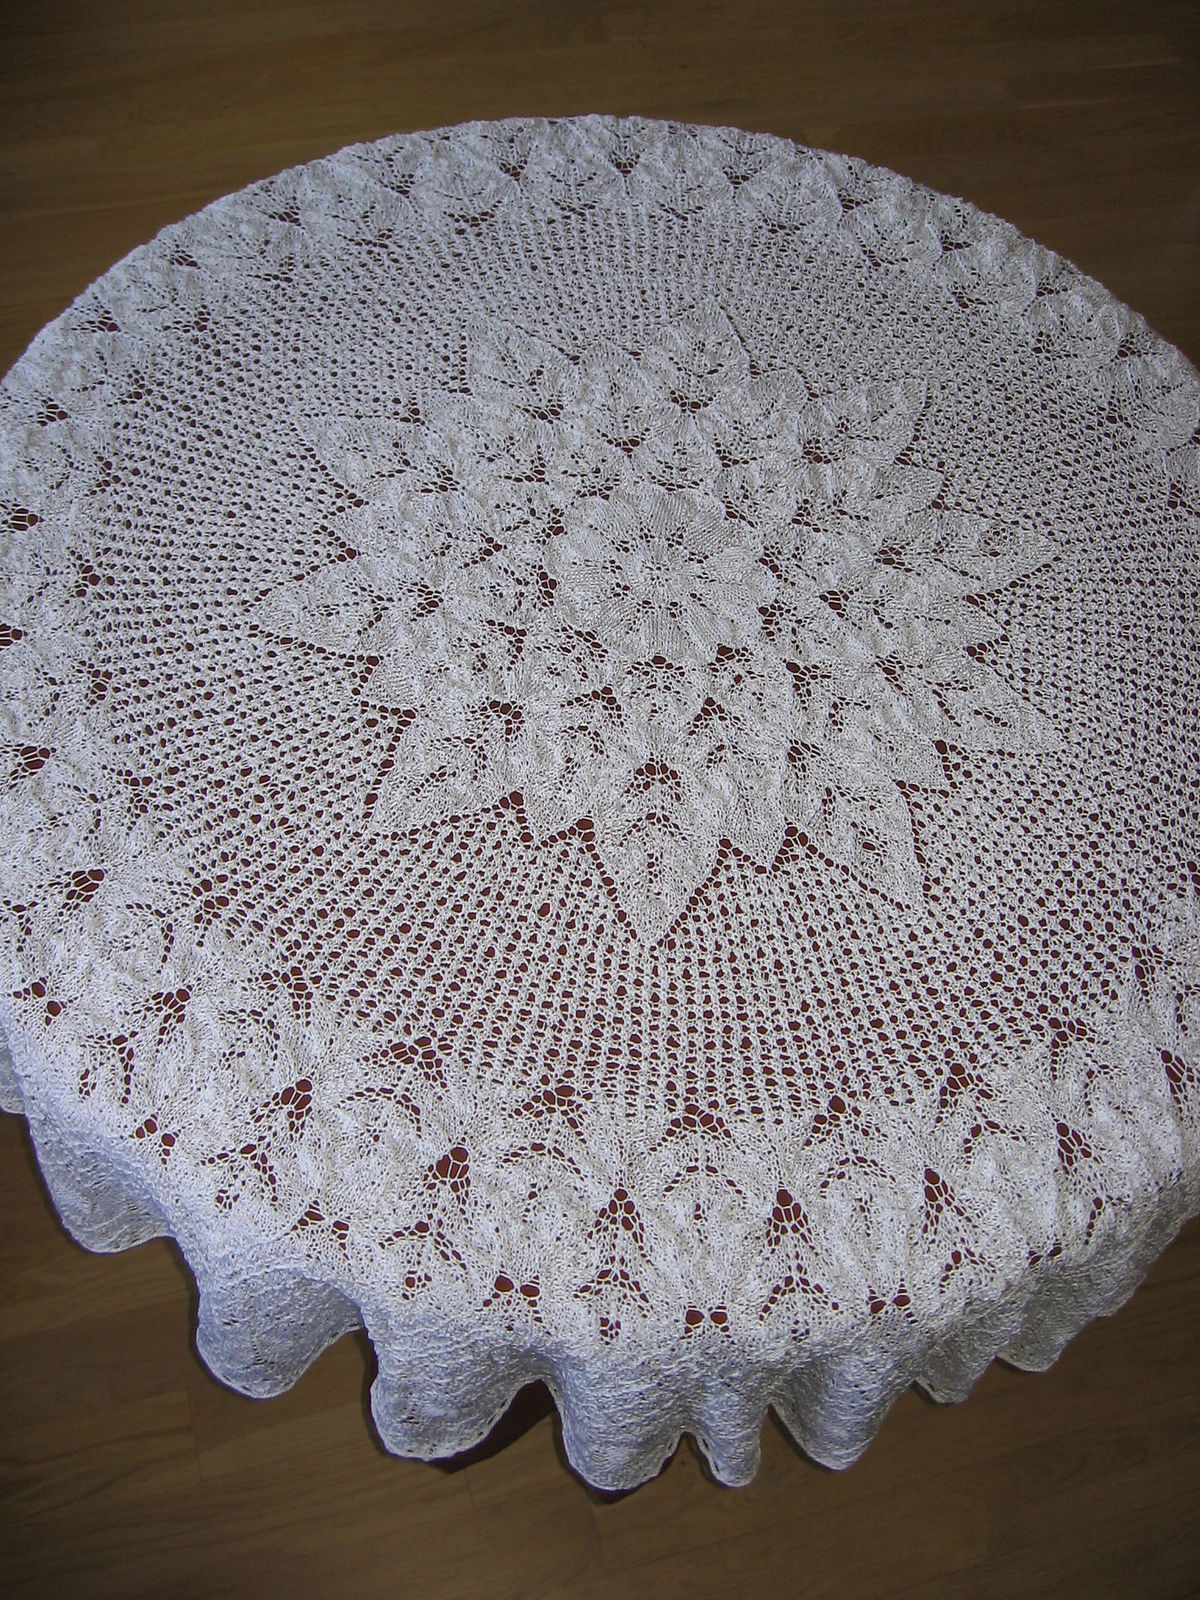 Knitting Patterns For Tablecloths Lace Knitting Wikipedia